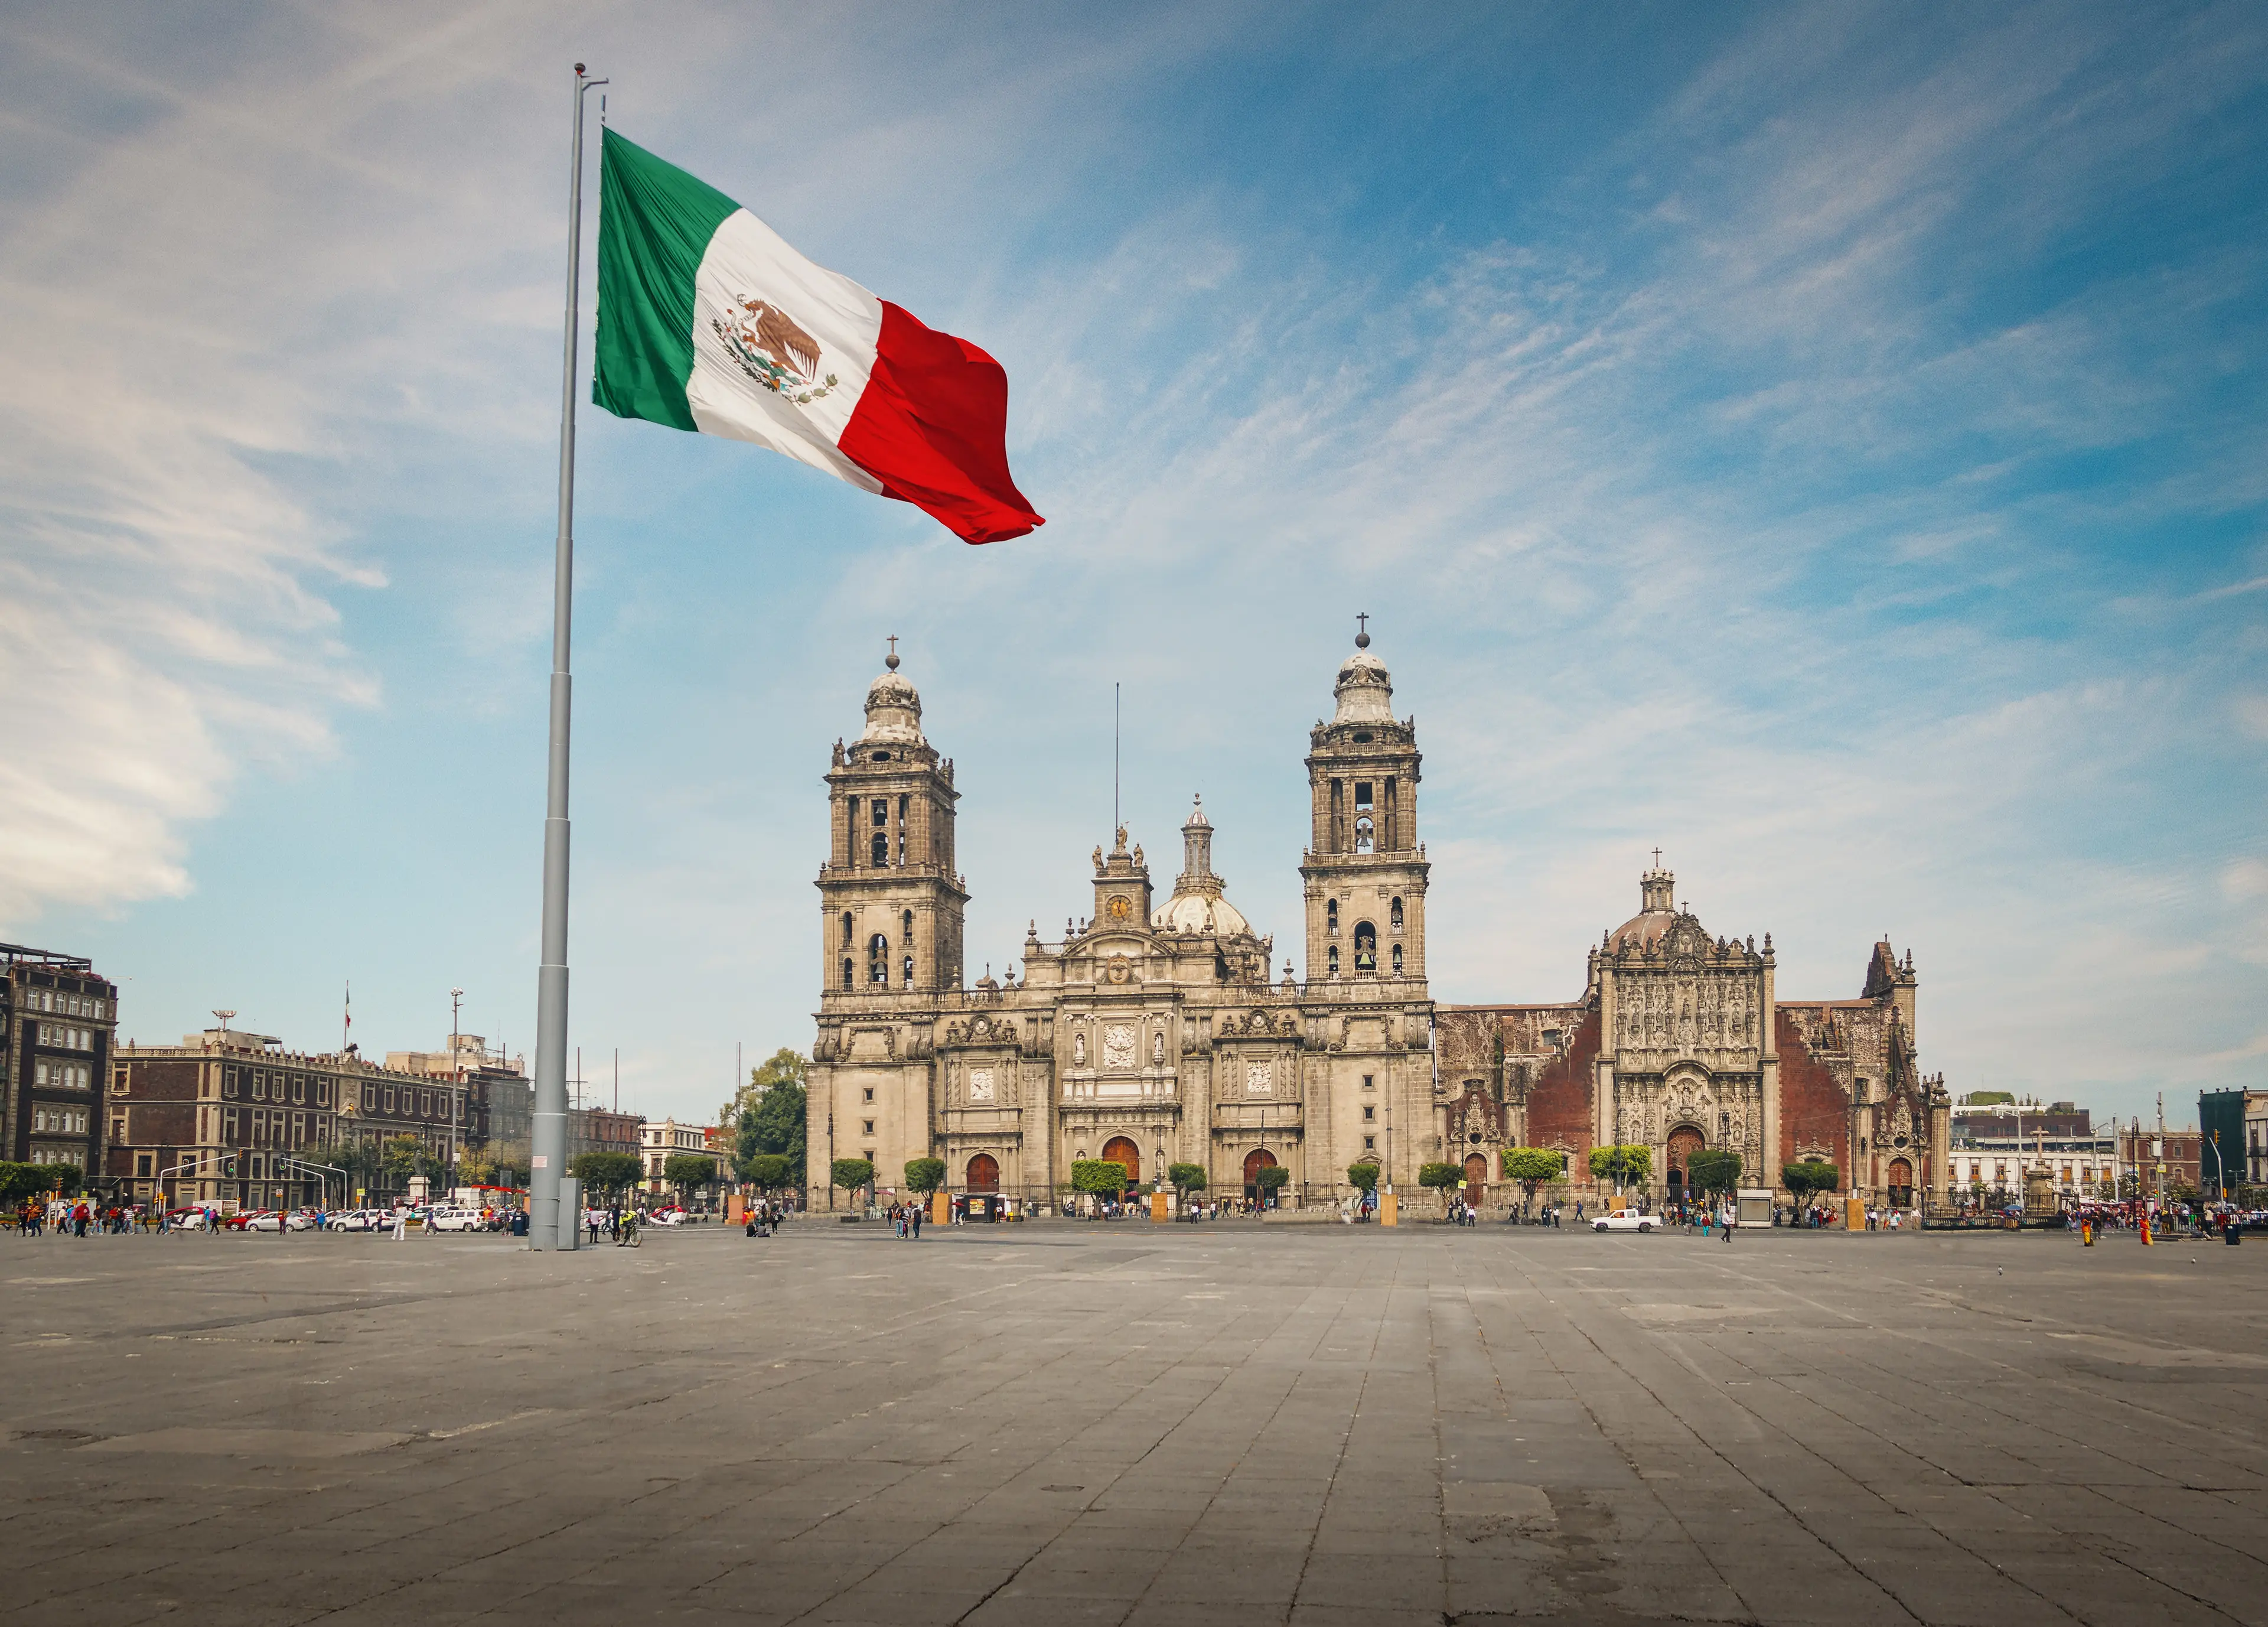 3-Day Local Experience of Food, Wine, and Shopping for Couples in Mexico City